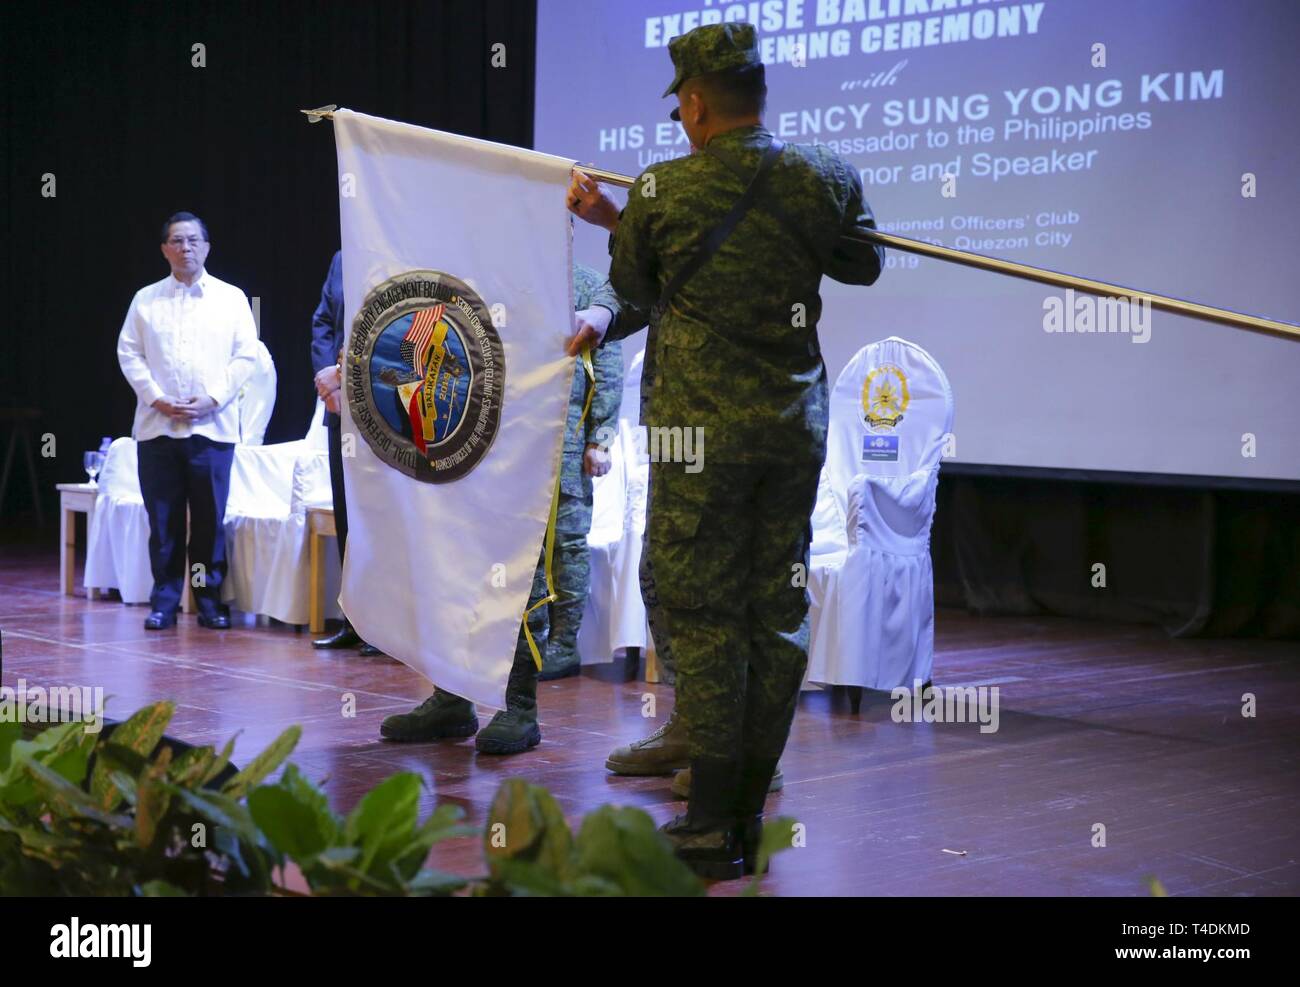 Armed Forces of the Philippines Lt. Gen. Gilbert Gapay and U.S. Marine Brig. Gen. Christopher A. McPhillips, Philippine and U.S. exercise co-directors respectively, unfurl the Balikatan 2019 flag during the opening ceremony at Camp Aguinaldo, Quezon City, April 1, 2019. Gapay is the commanding general of Southern Luzon Command and McPhillips is the commanding general of 3rd Marine Expeditionary Brigade, III Marine Expeditionary Force. Balikatan is an annual U.S.-Philippine bilateral military exercise focused on a variety of missions including humanitarian and disaster relief, counterterrorism, Stock Photo